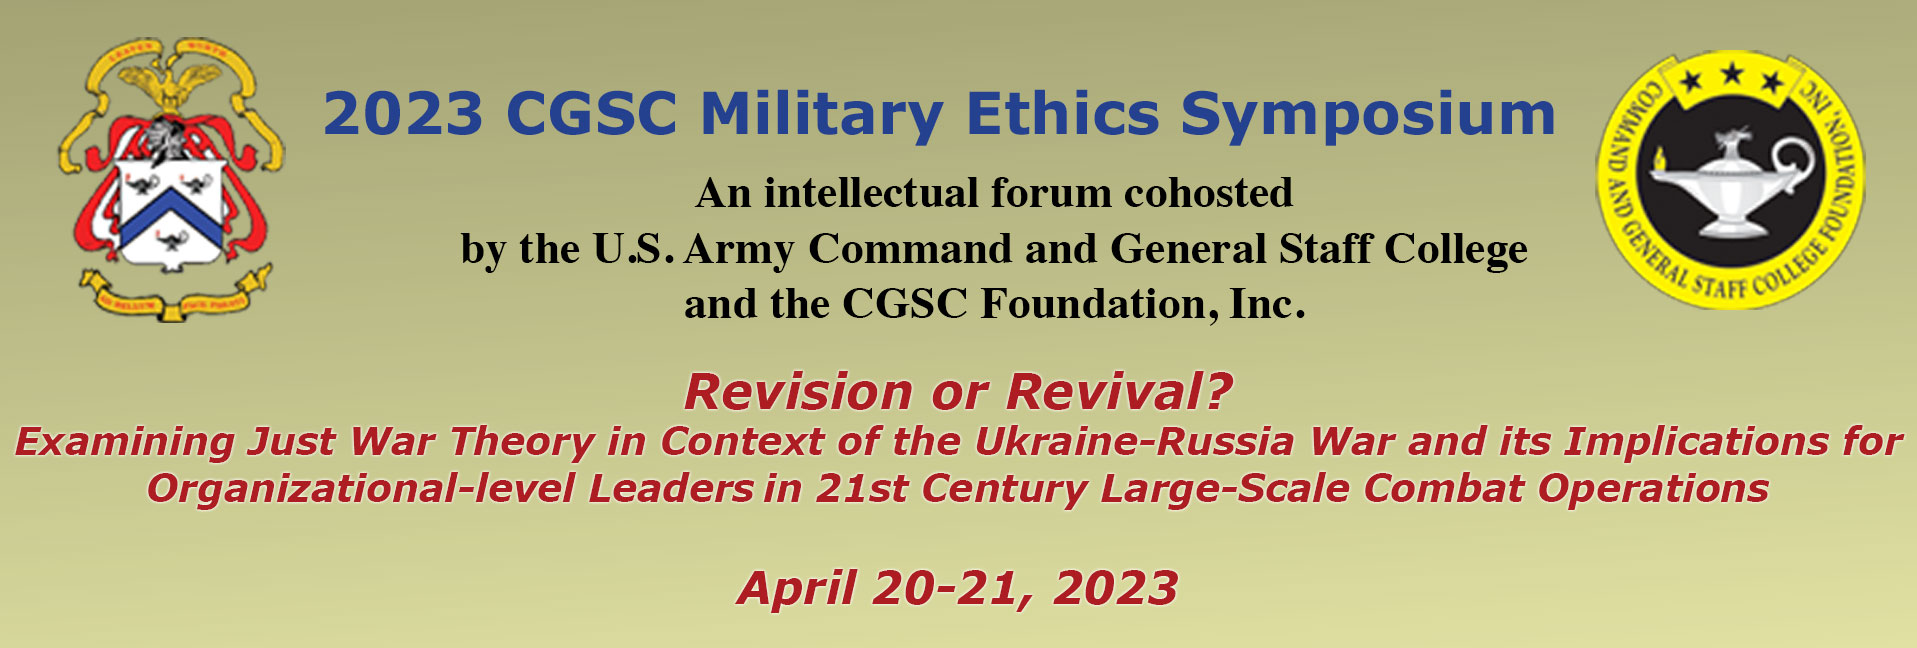 2023 CGSC Military Ethics Symposium composite image with the CGSC crest and the CGSC Foundation logo over text of the theme of the symposium